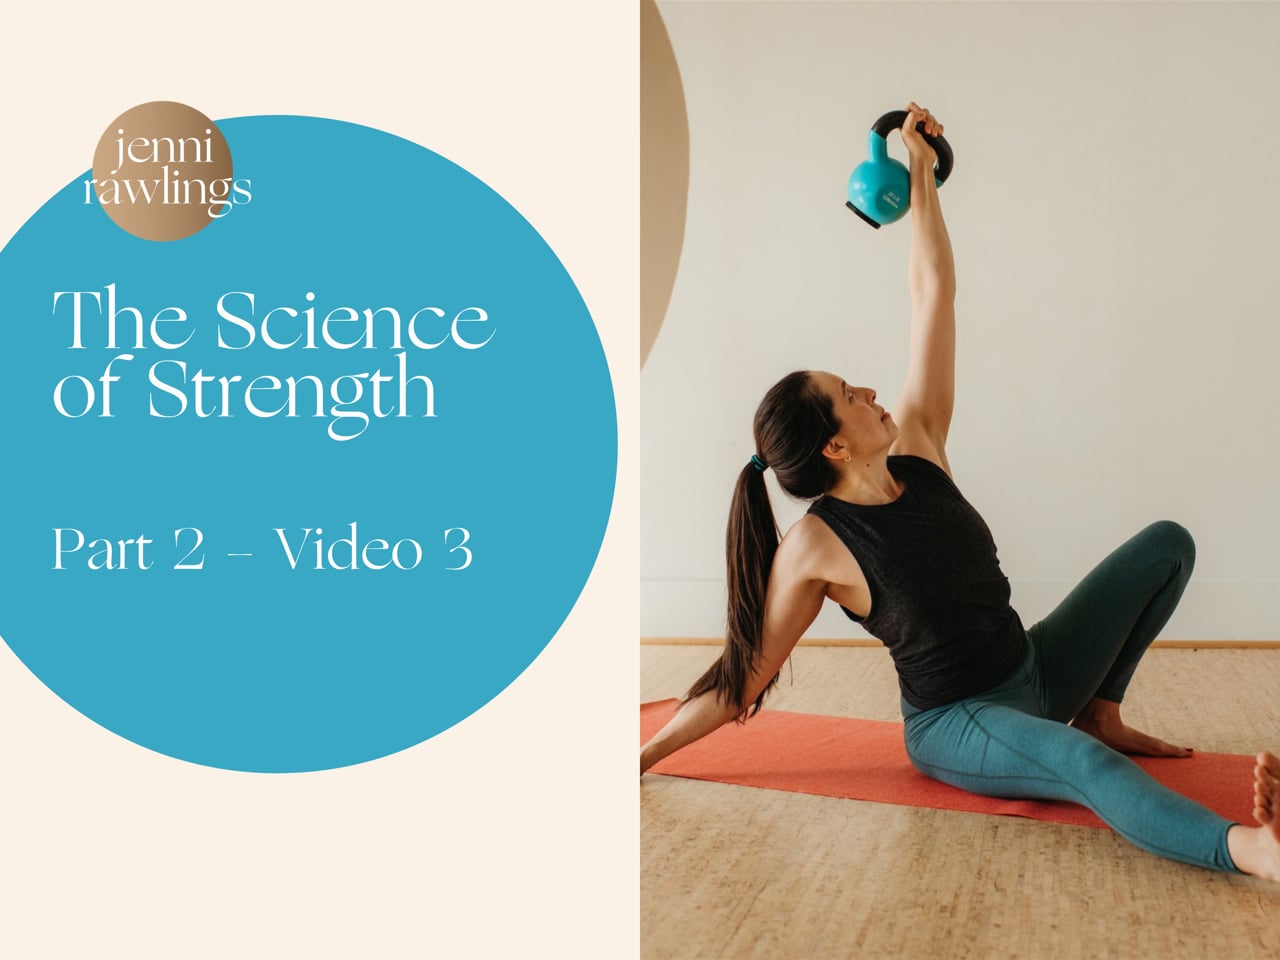 The Science of Strength Part 2, Video 3